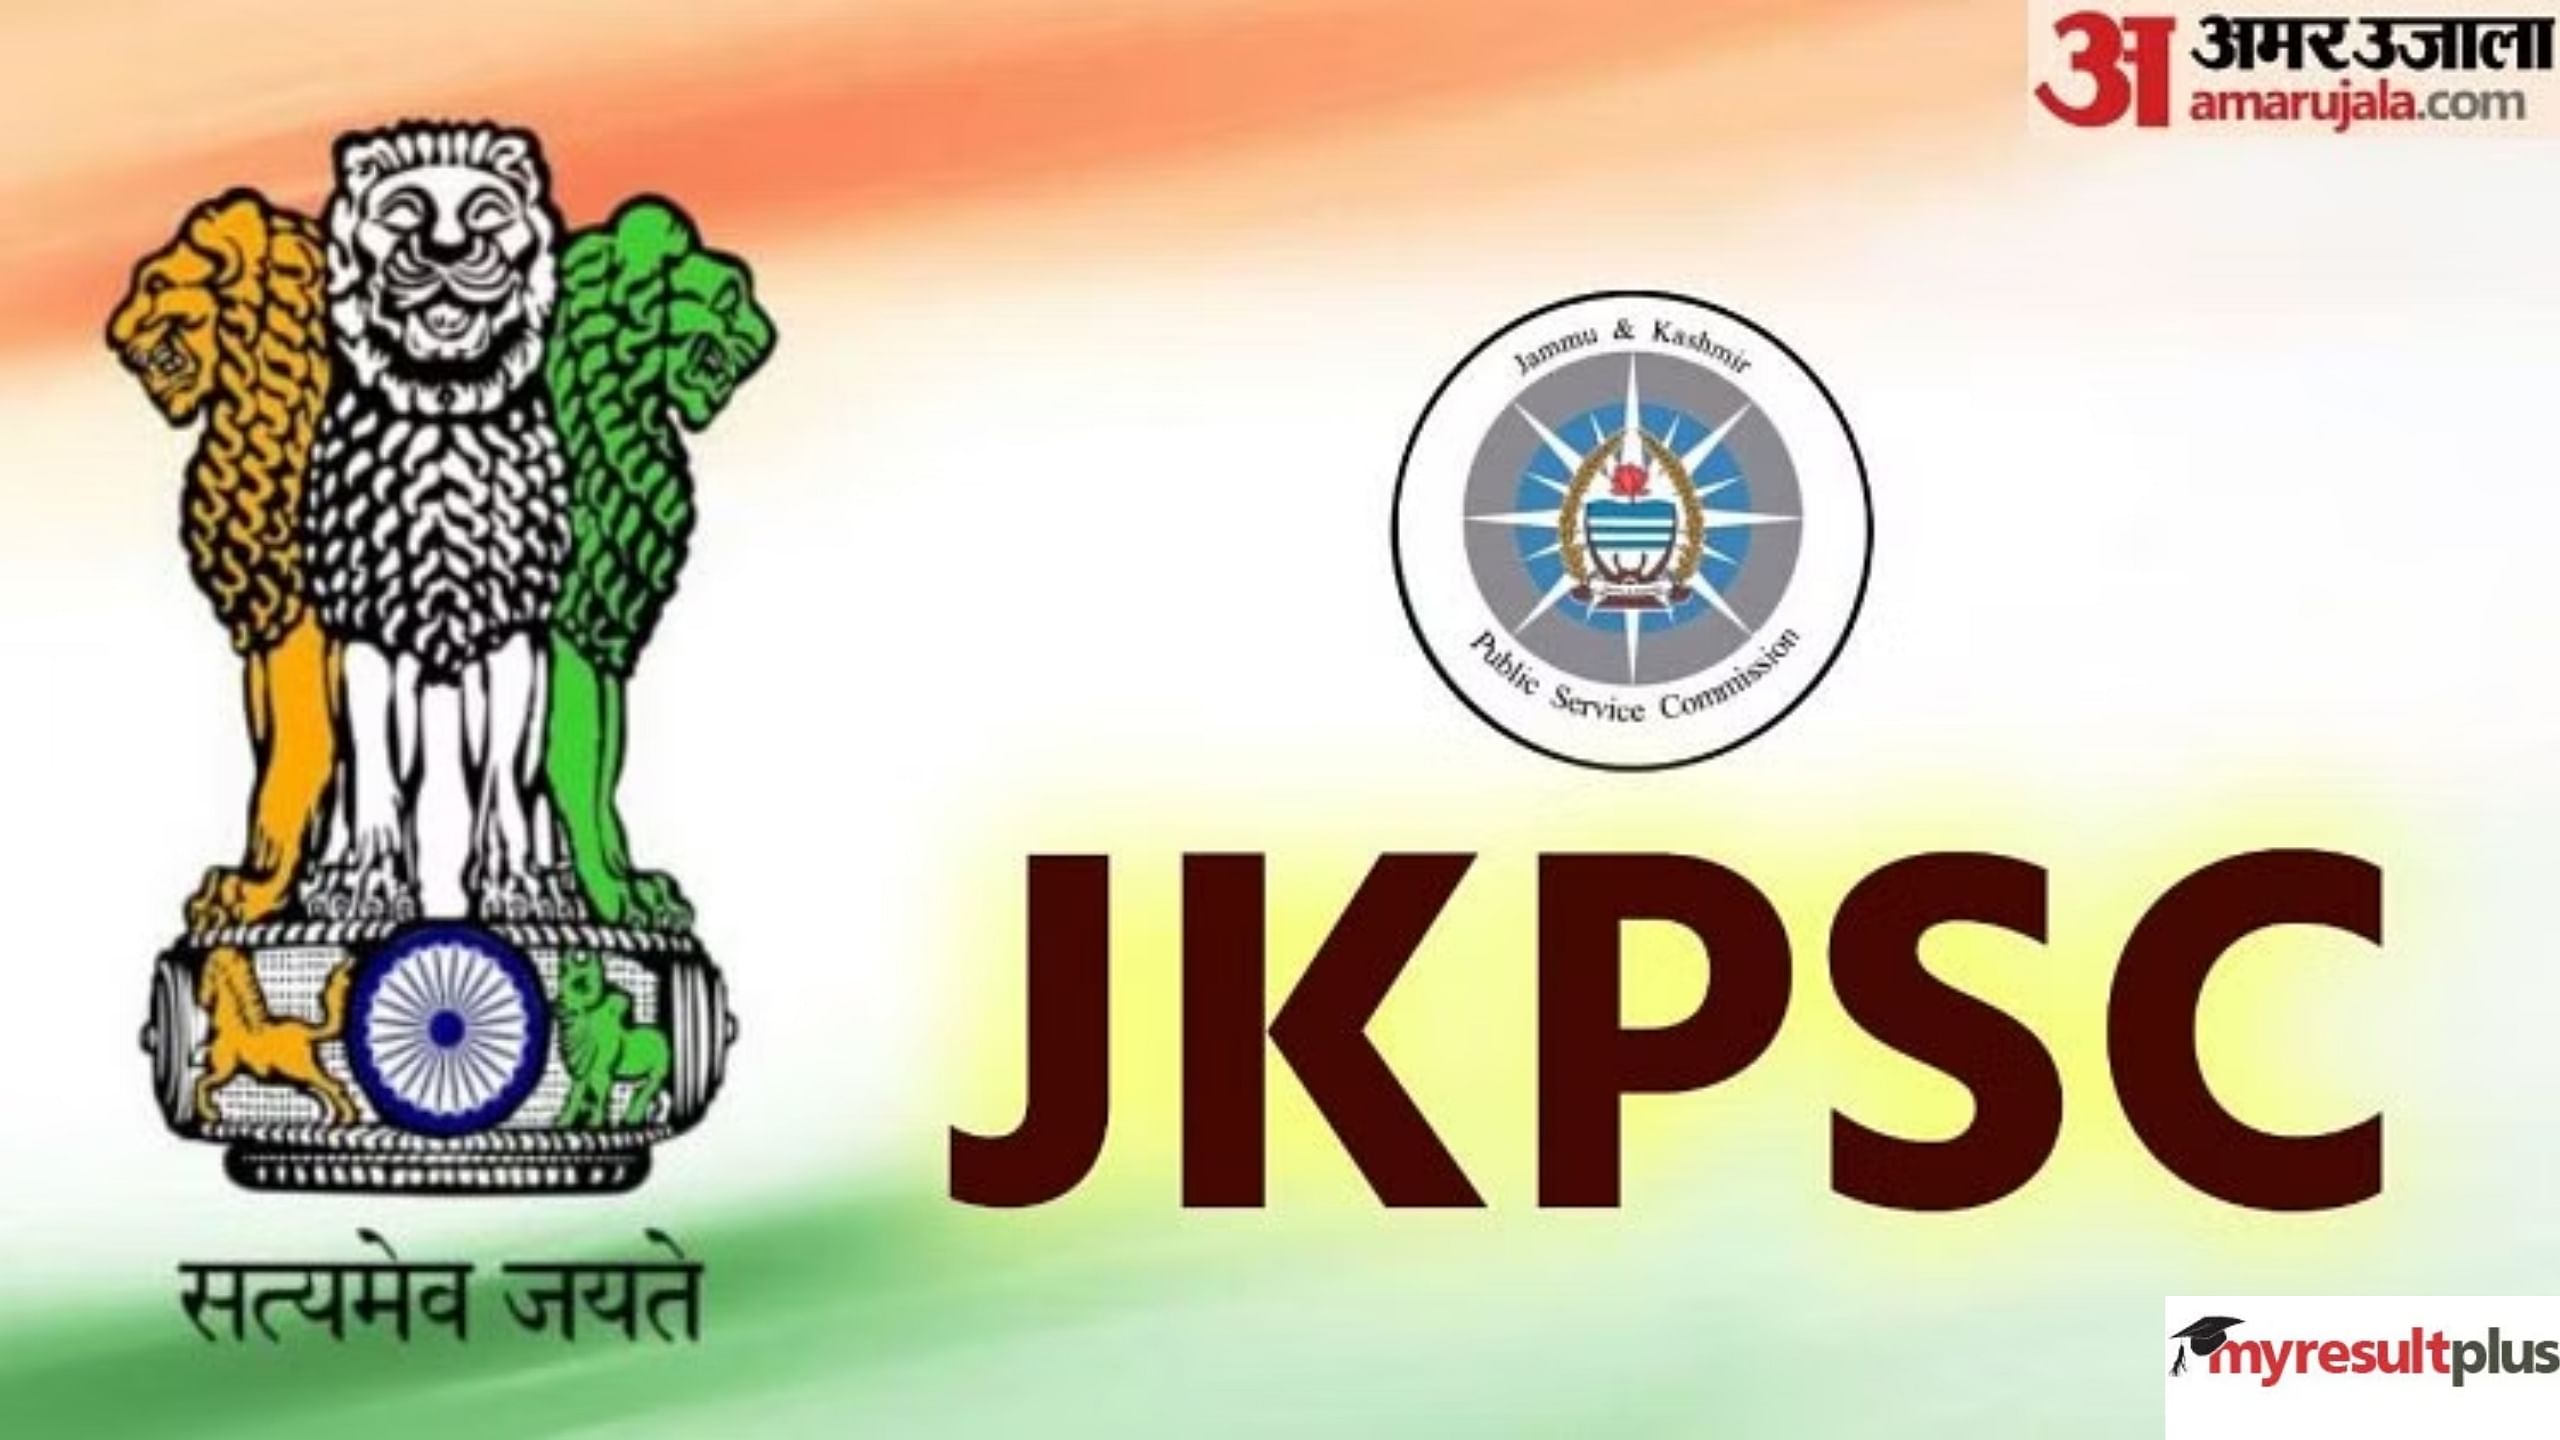 JKPSC CCE 2023: Prelims Exam Date Announced at jkpsc.nic.in, Check Details